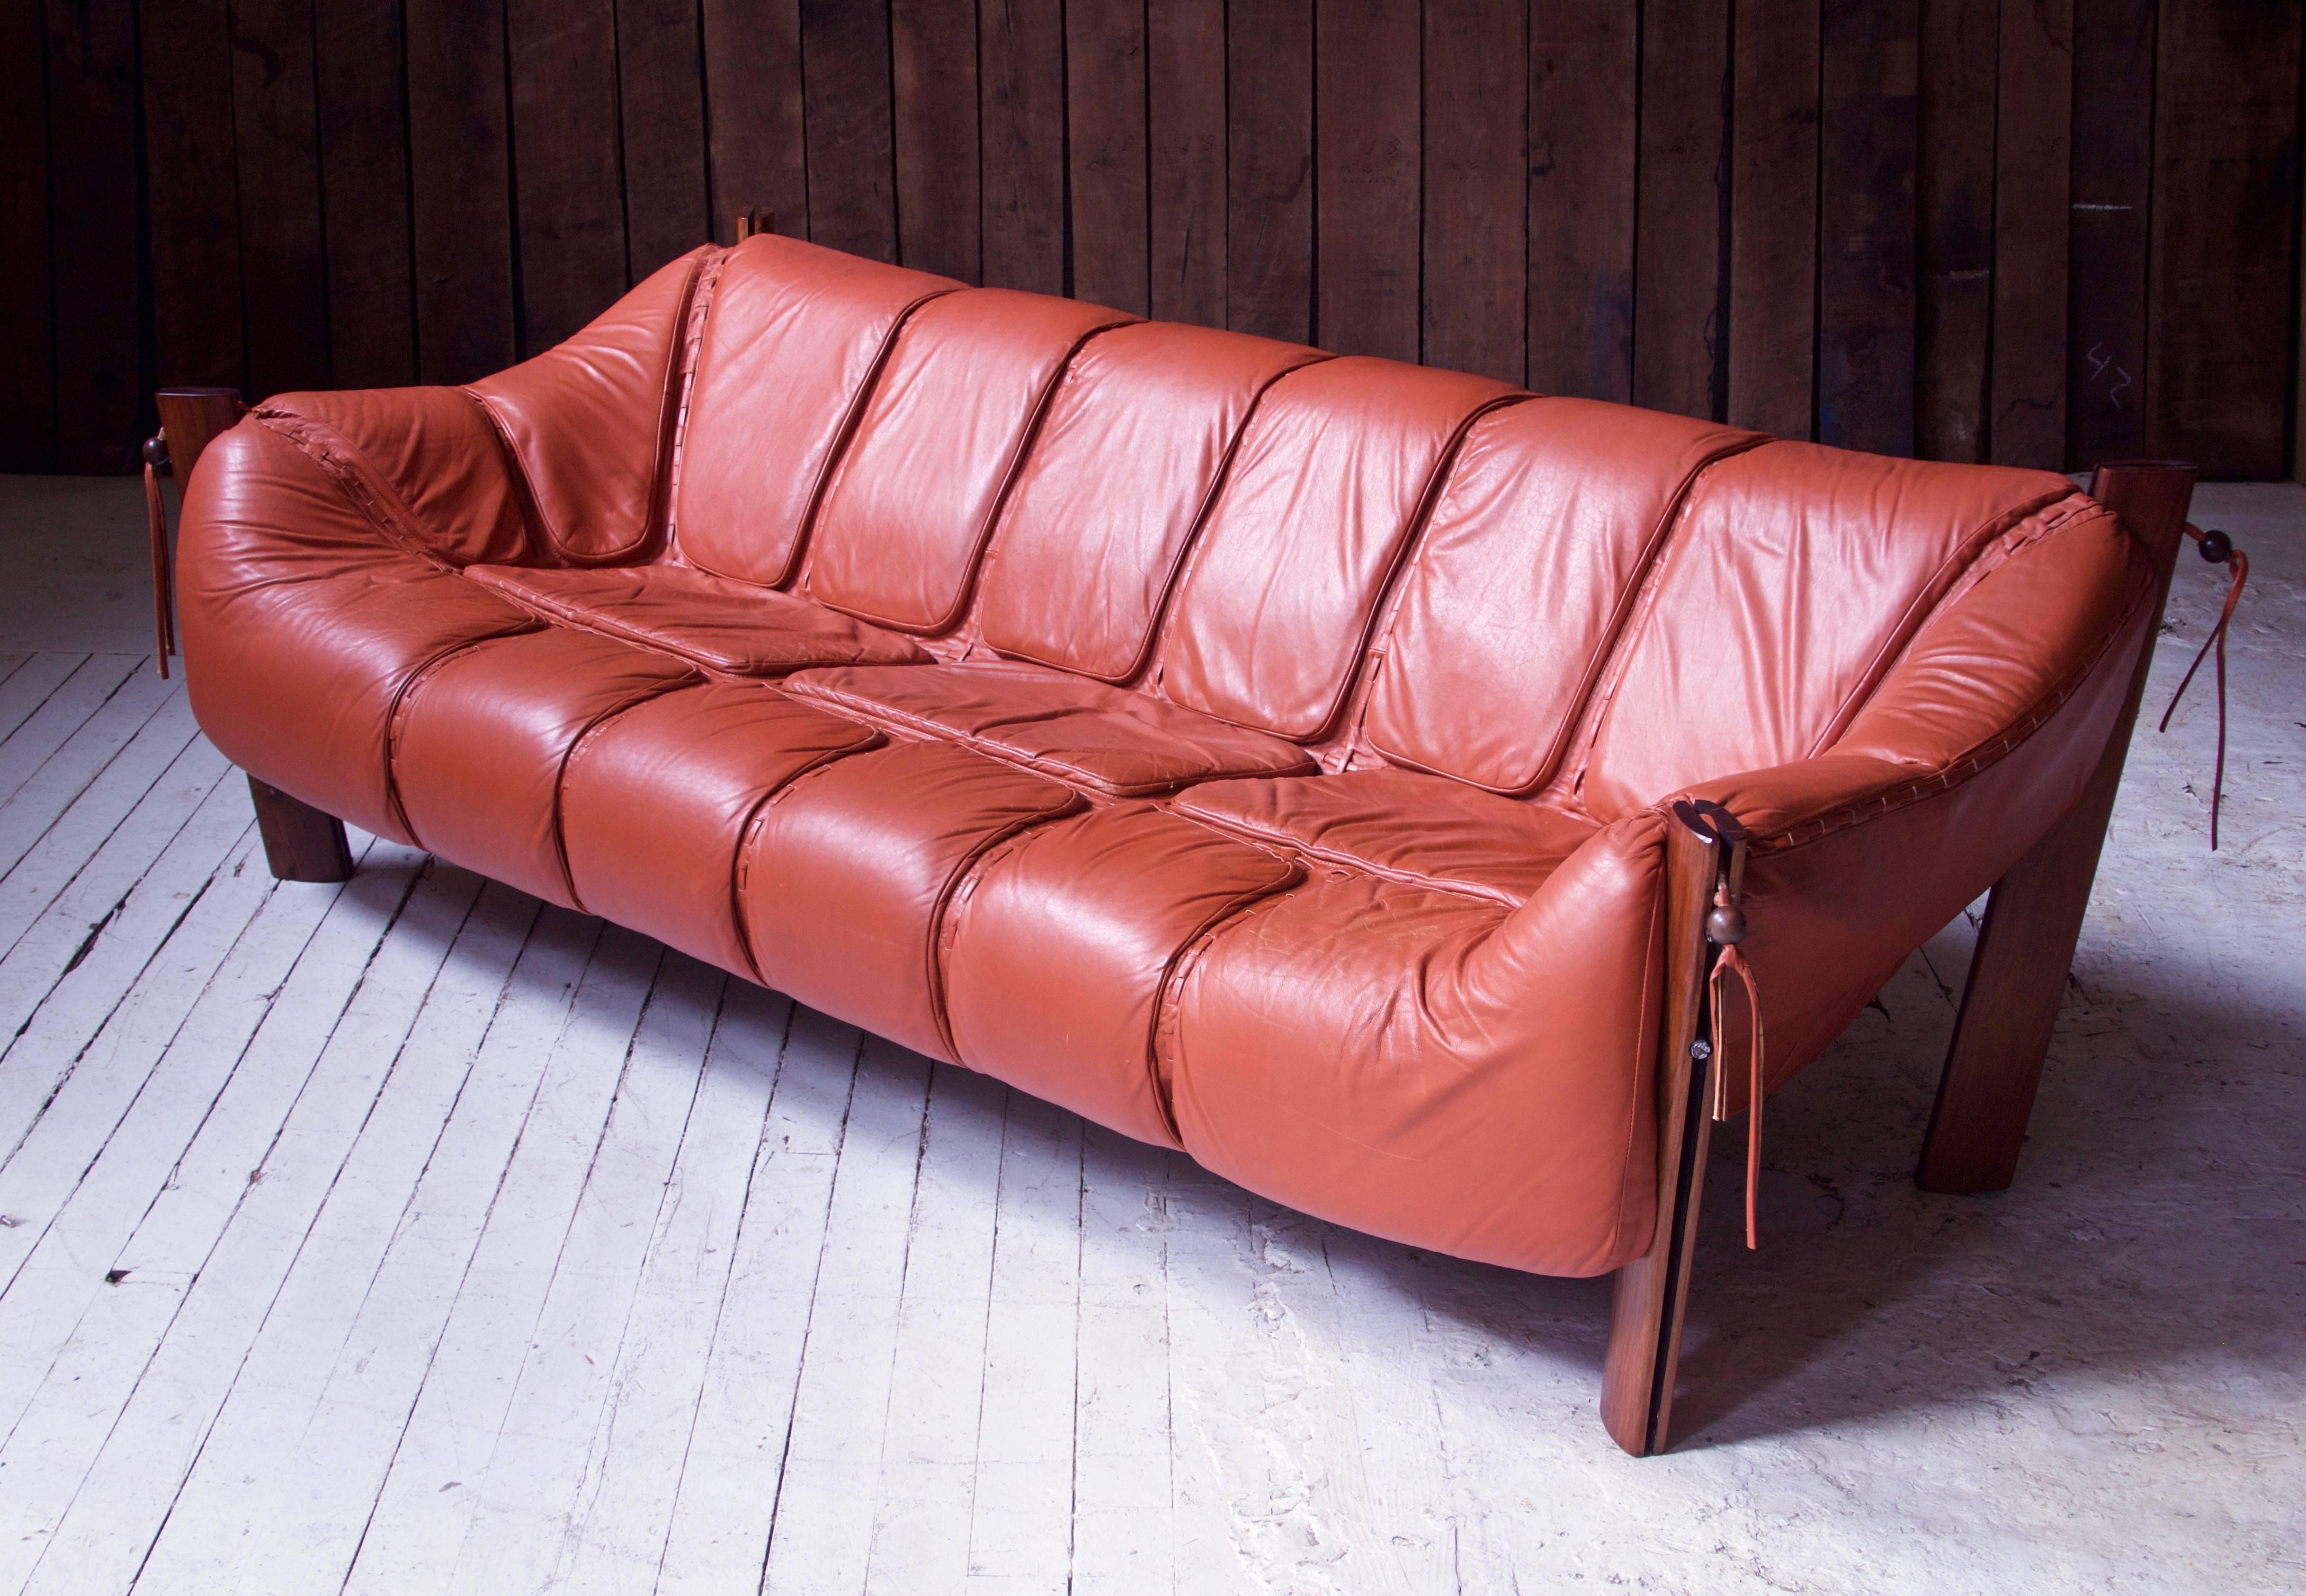 A well-preserved vintage Percival Lafer MP-211 Brazilian rosewood and leather full-size sofa made in Sao Paolo, Brazil by Lafer S.A Ind. e Com, circa 1975. This piece has come from the Carmel, NY estate of the original owner, has seen minimal usage